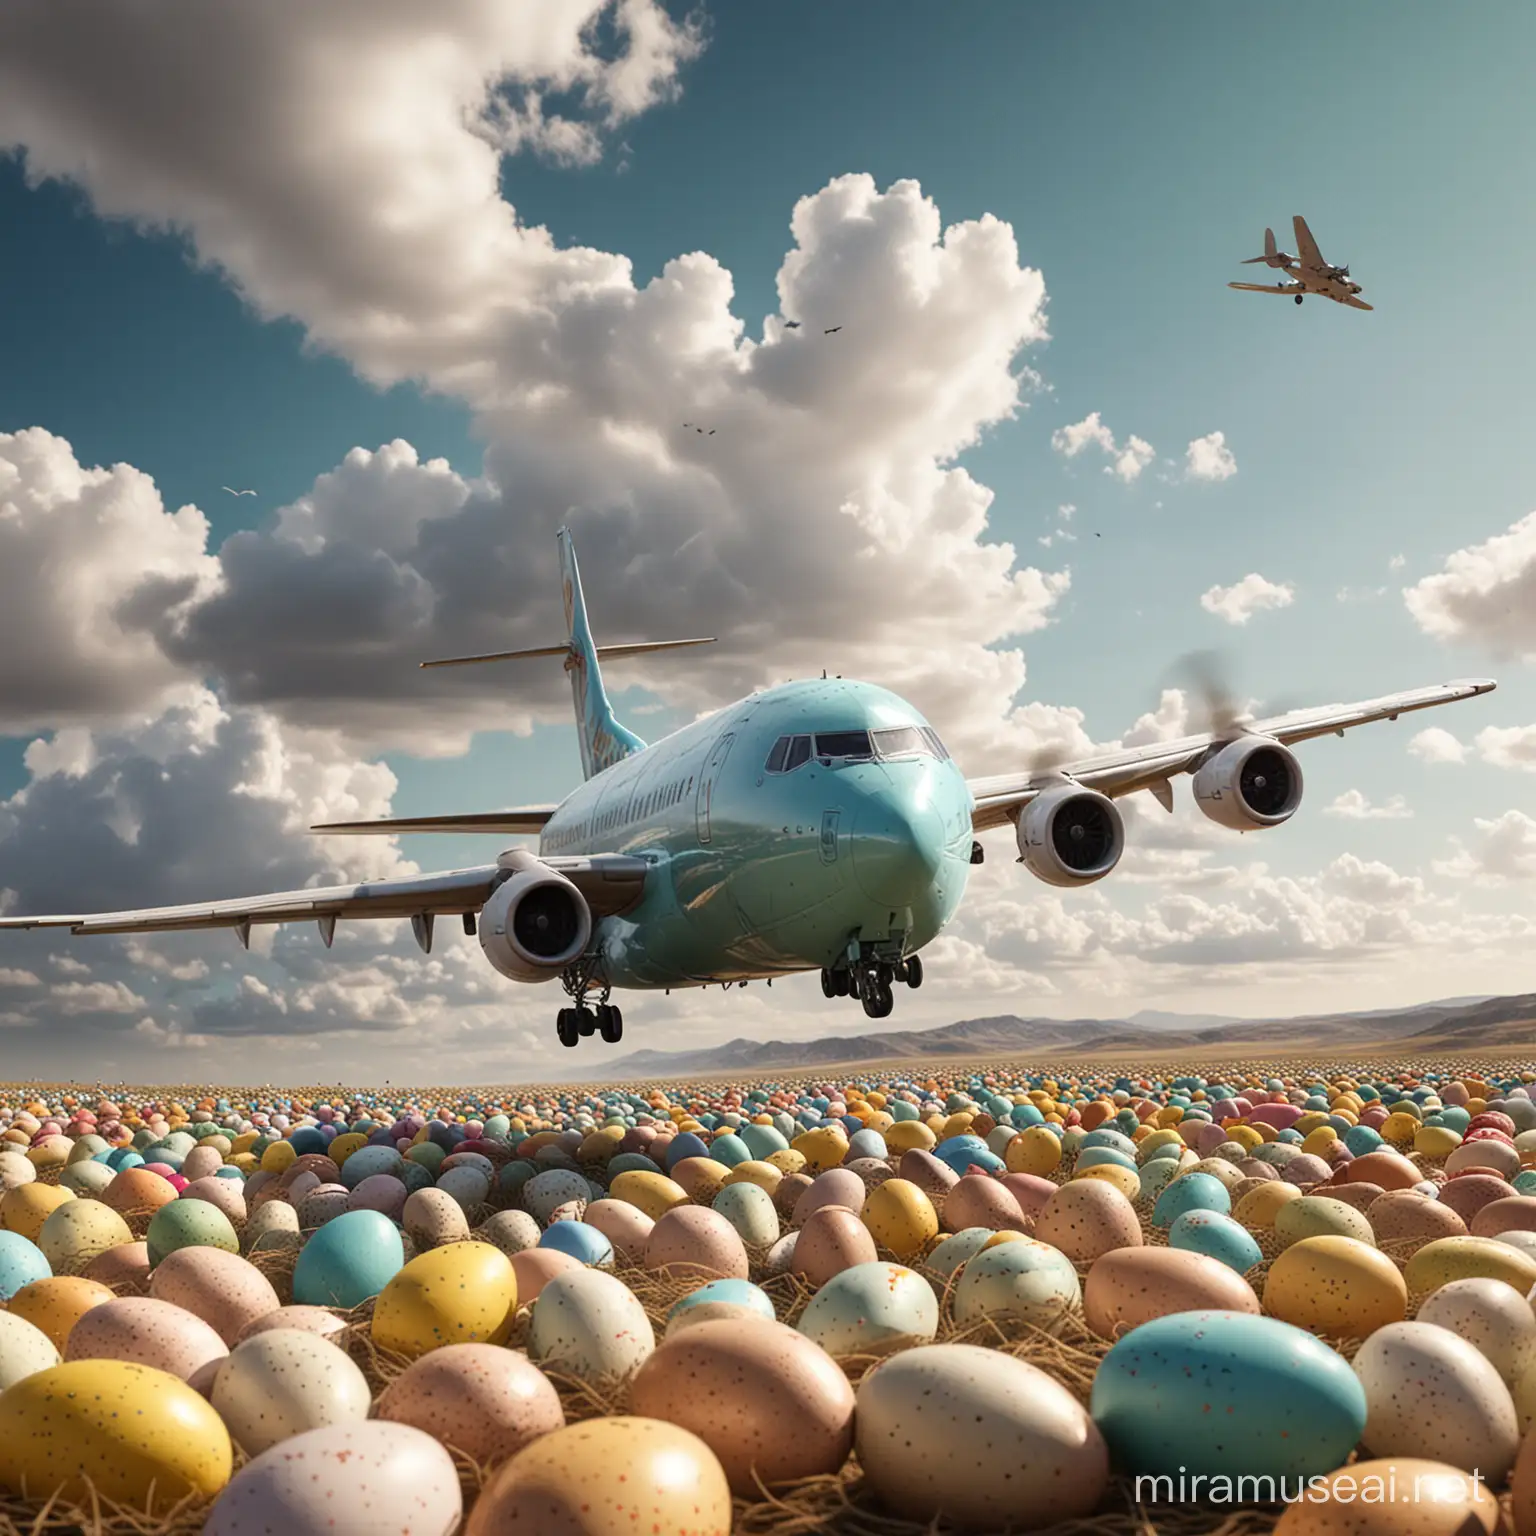 A wide photorealistic image combines Easter theme, including an airplane